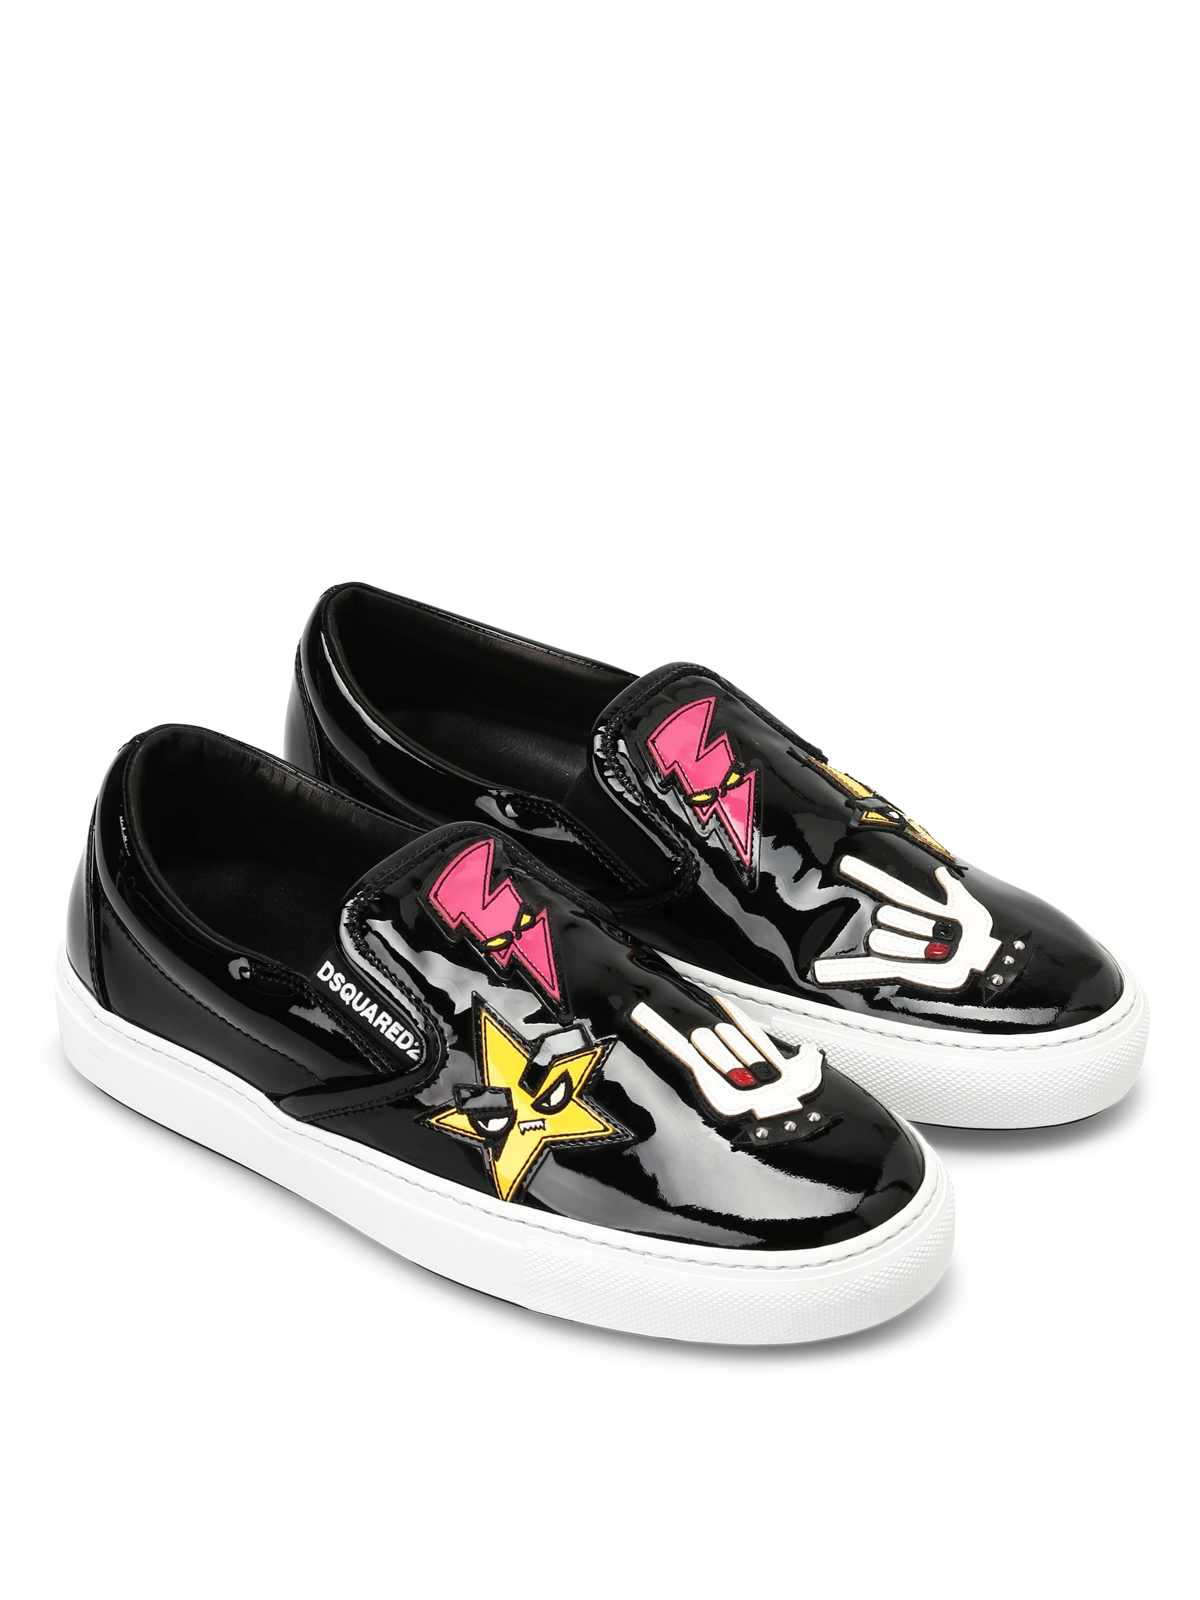 dsquared2 teddy bear sneakers